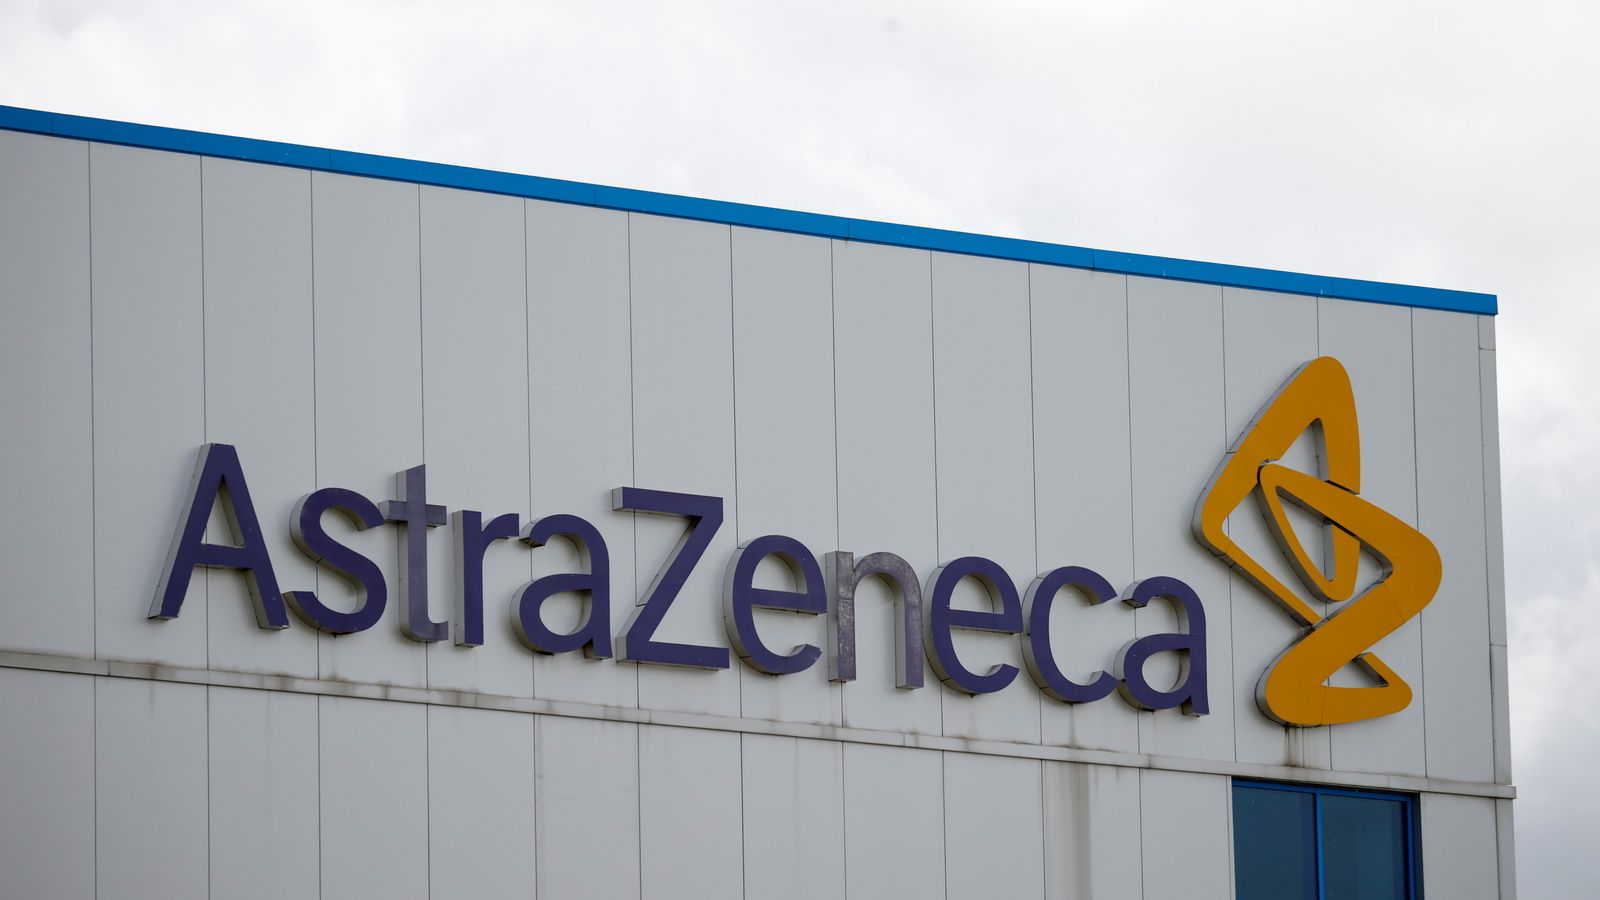 AstraZeneca staves off shareholder rebellion aimed at curbing pay-outs